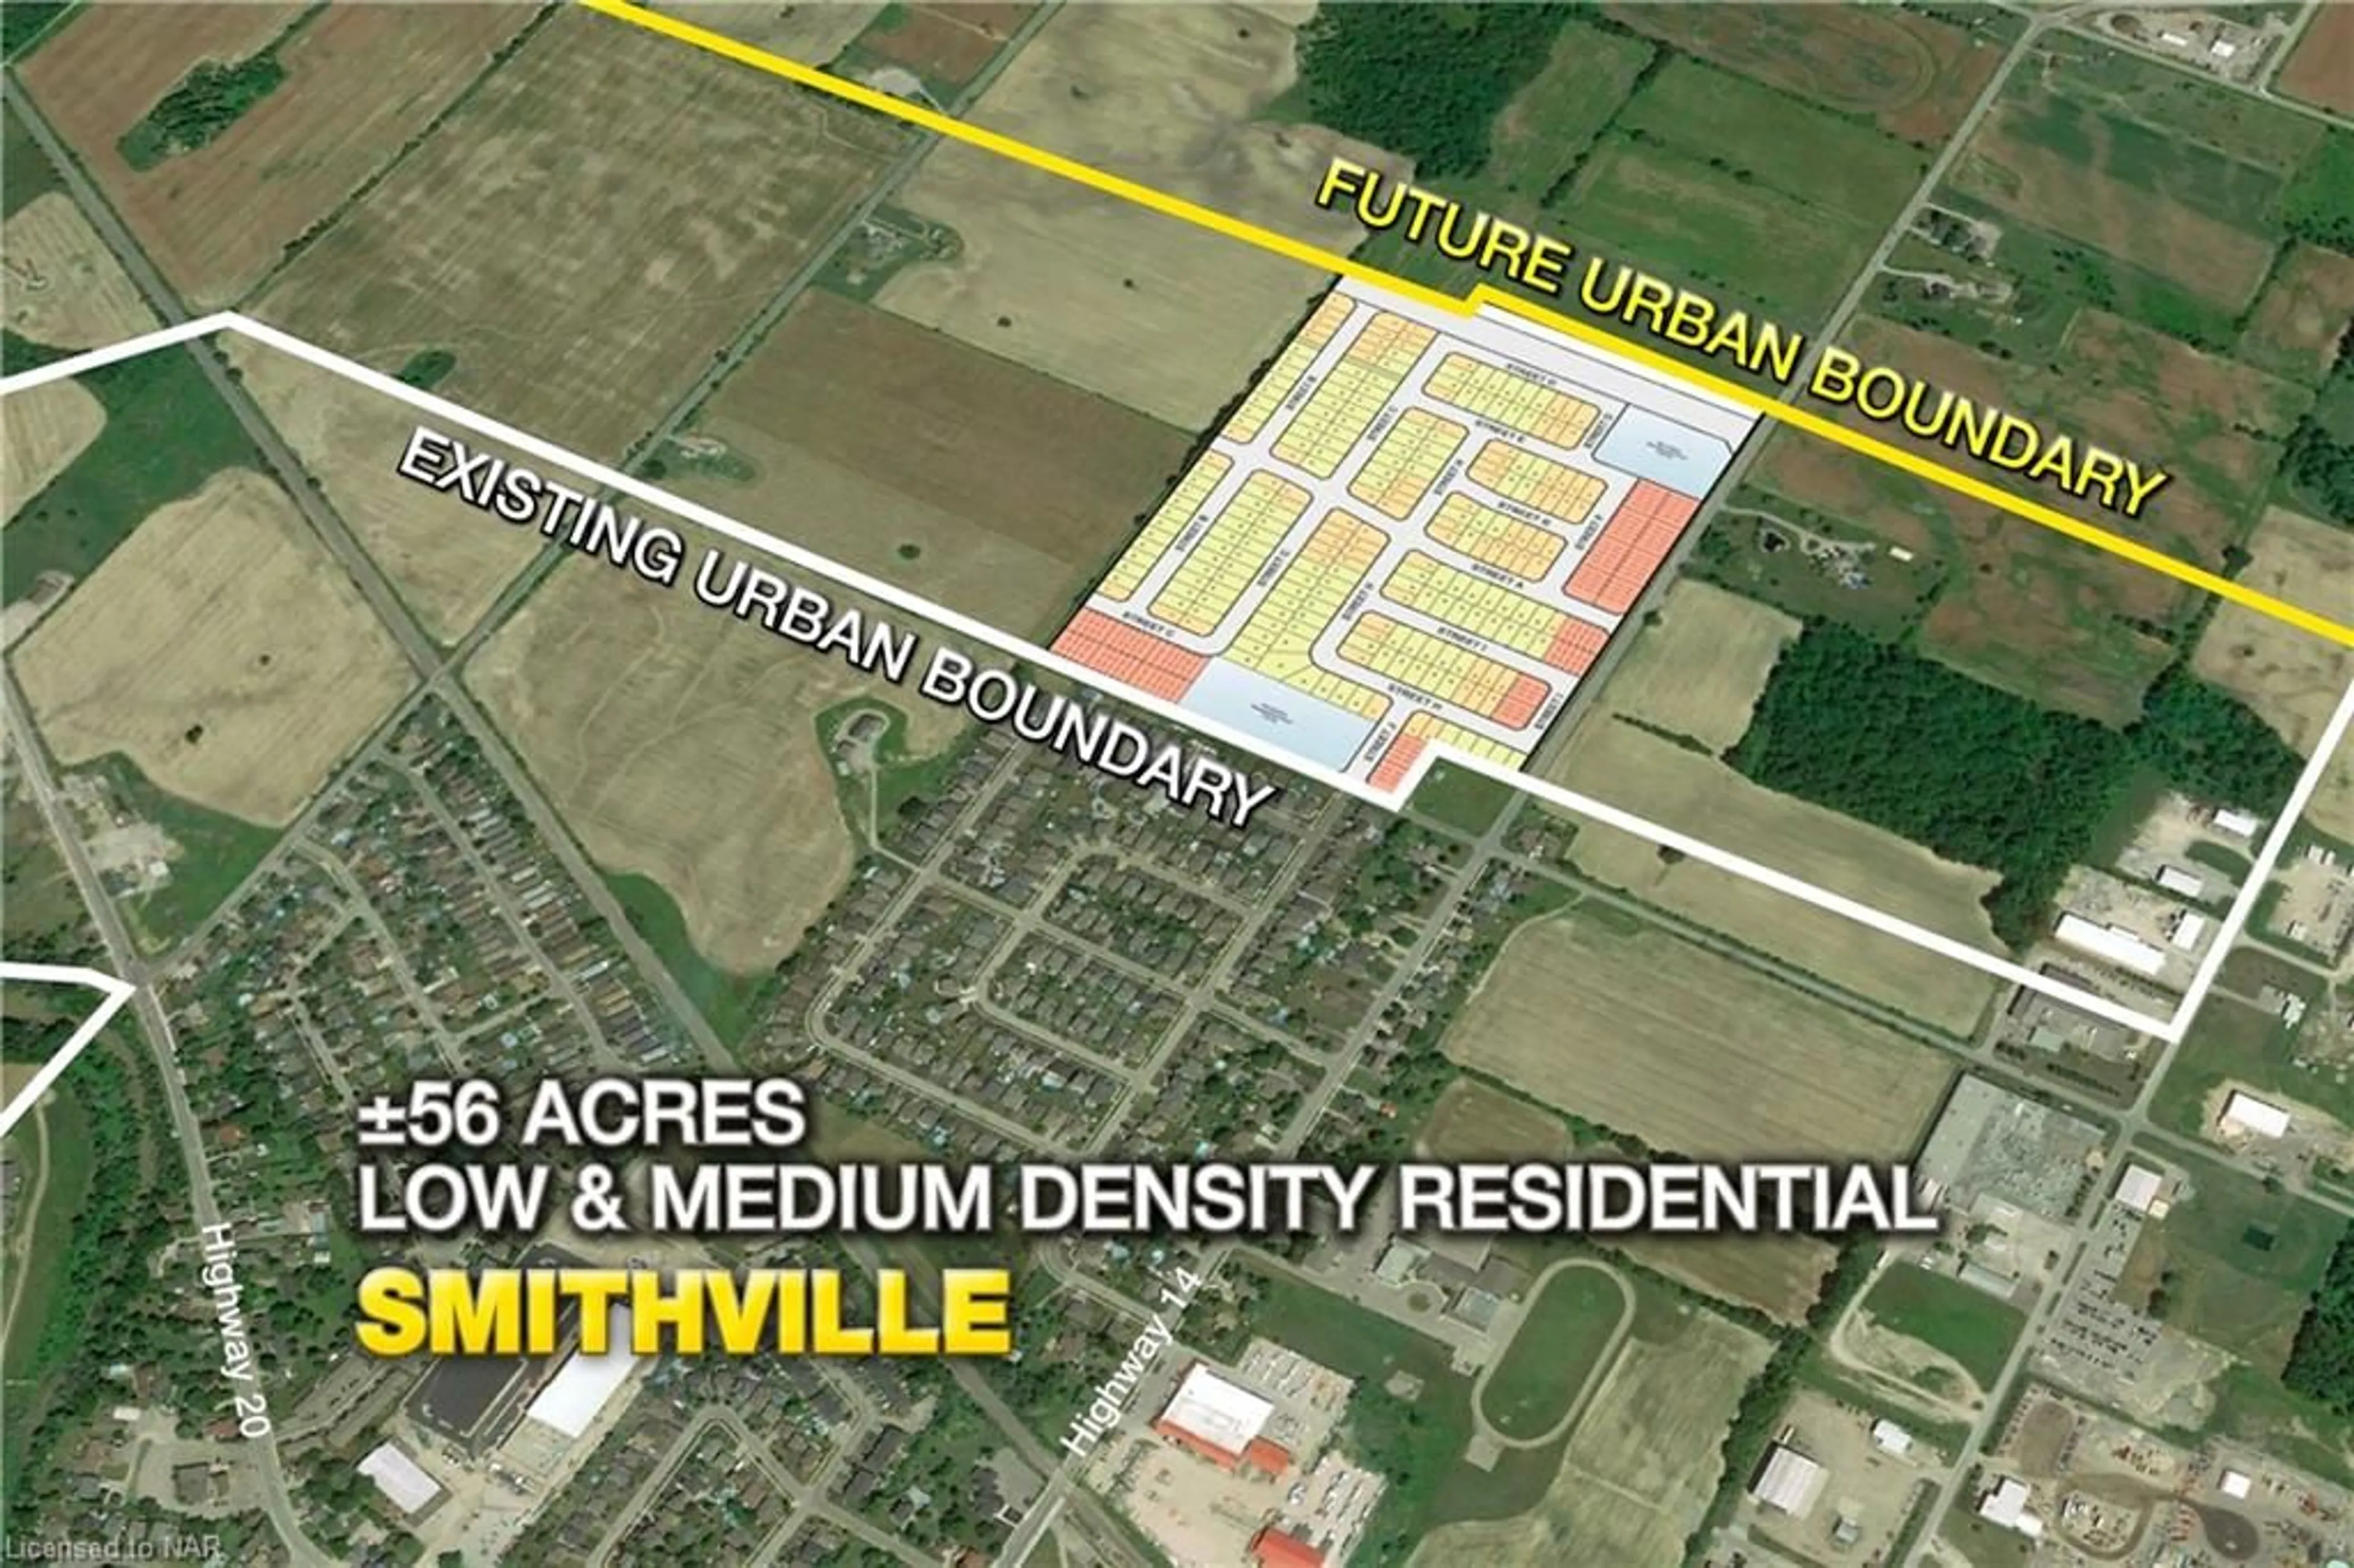 Picture of a map for LOT 8 Station Rd, West Lincoln Ontario L0R 2A0